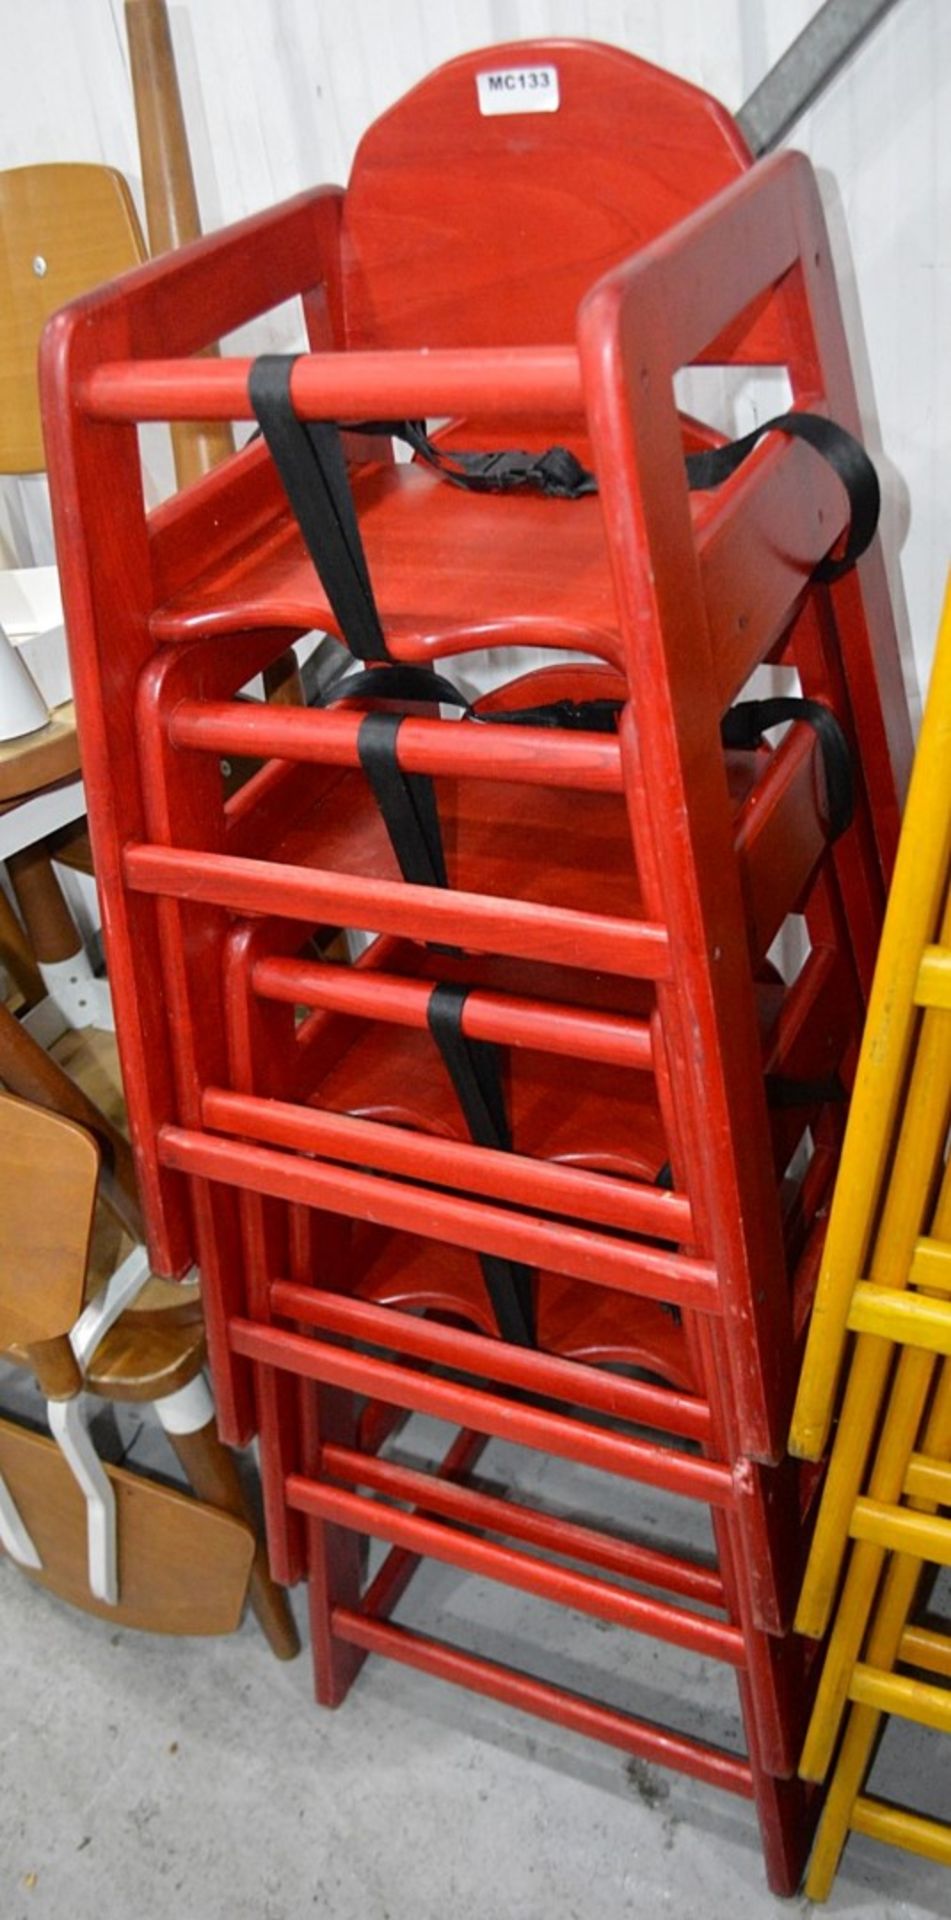 4 x FAMEG Baby High Chairs In Red - Dimensions: Width 48 x Depth 48 x Back Height 75cm, Seat 50cm - Image 8 of 8